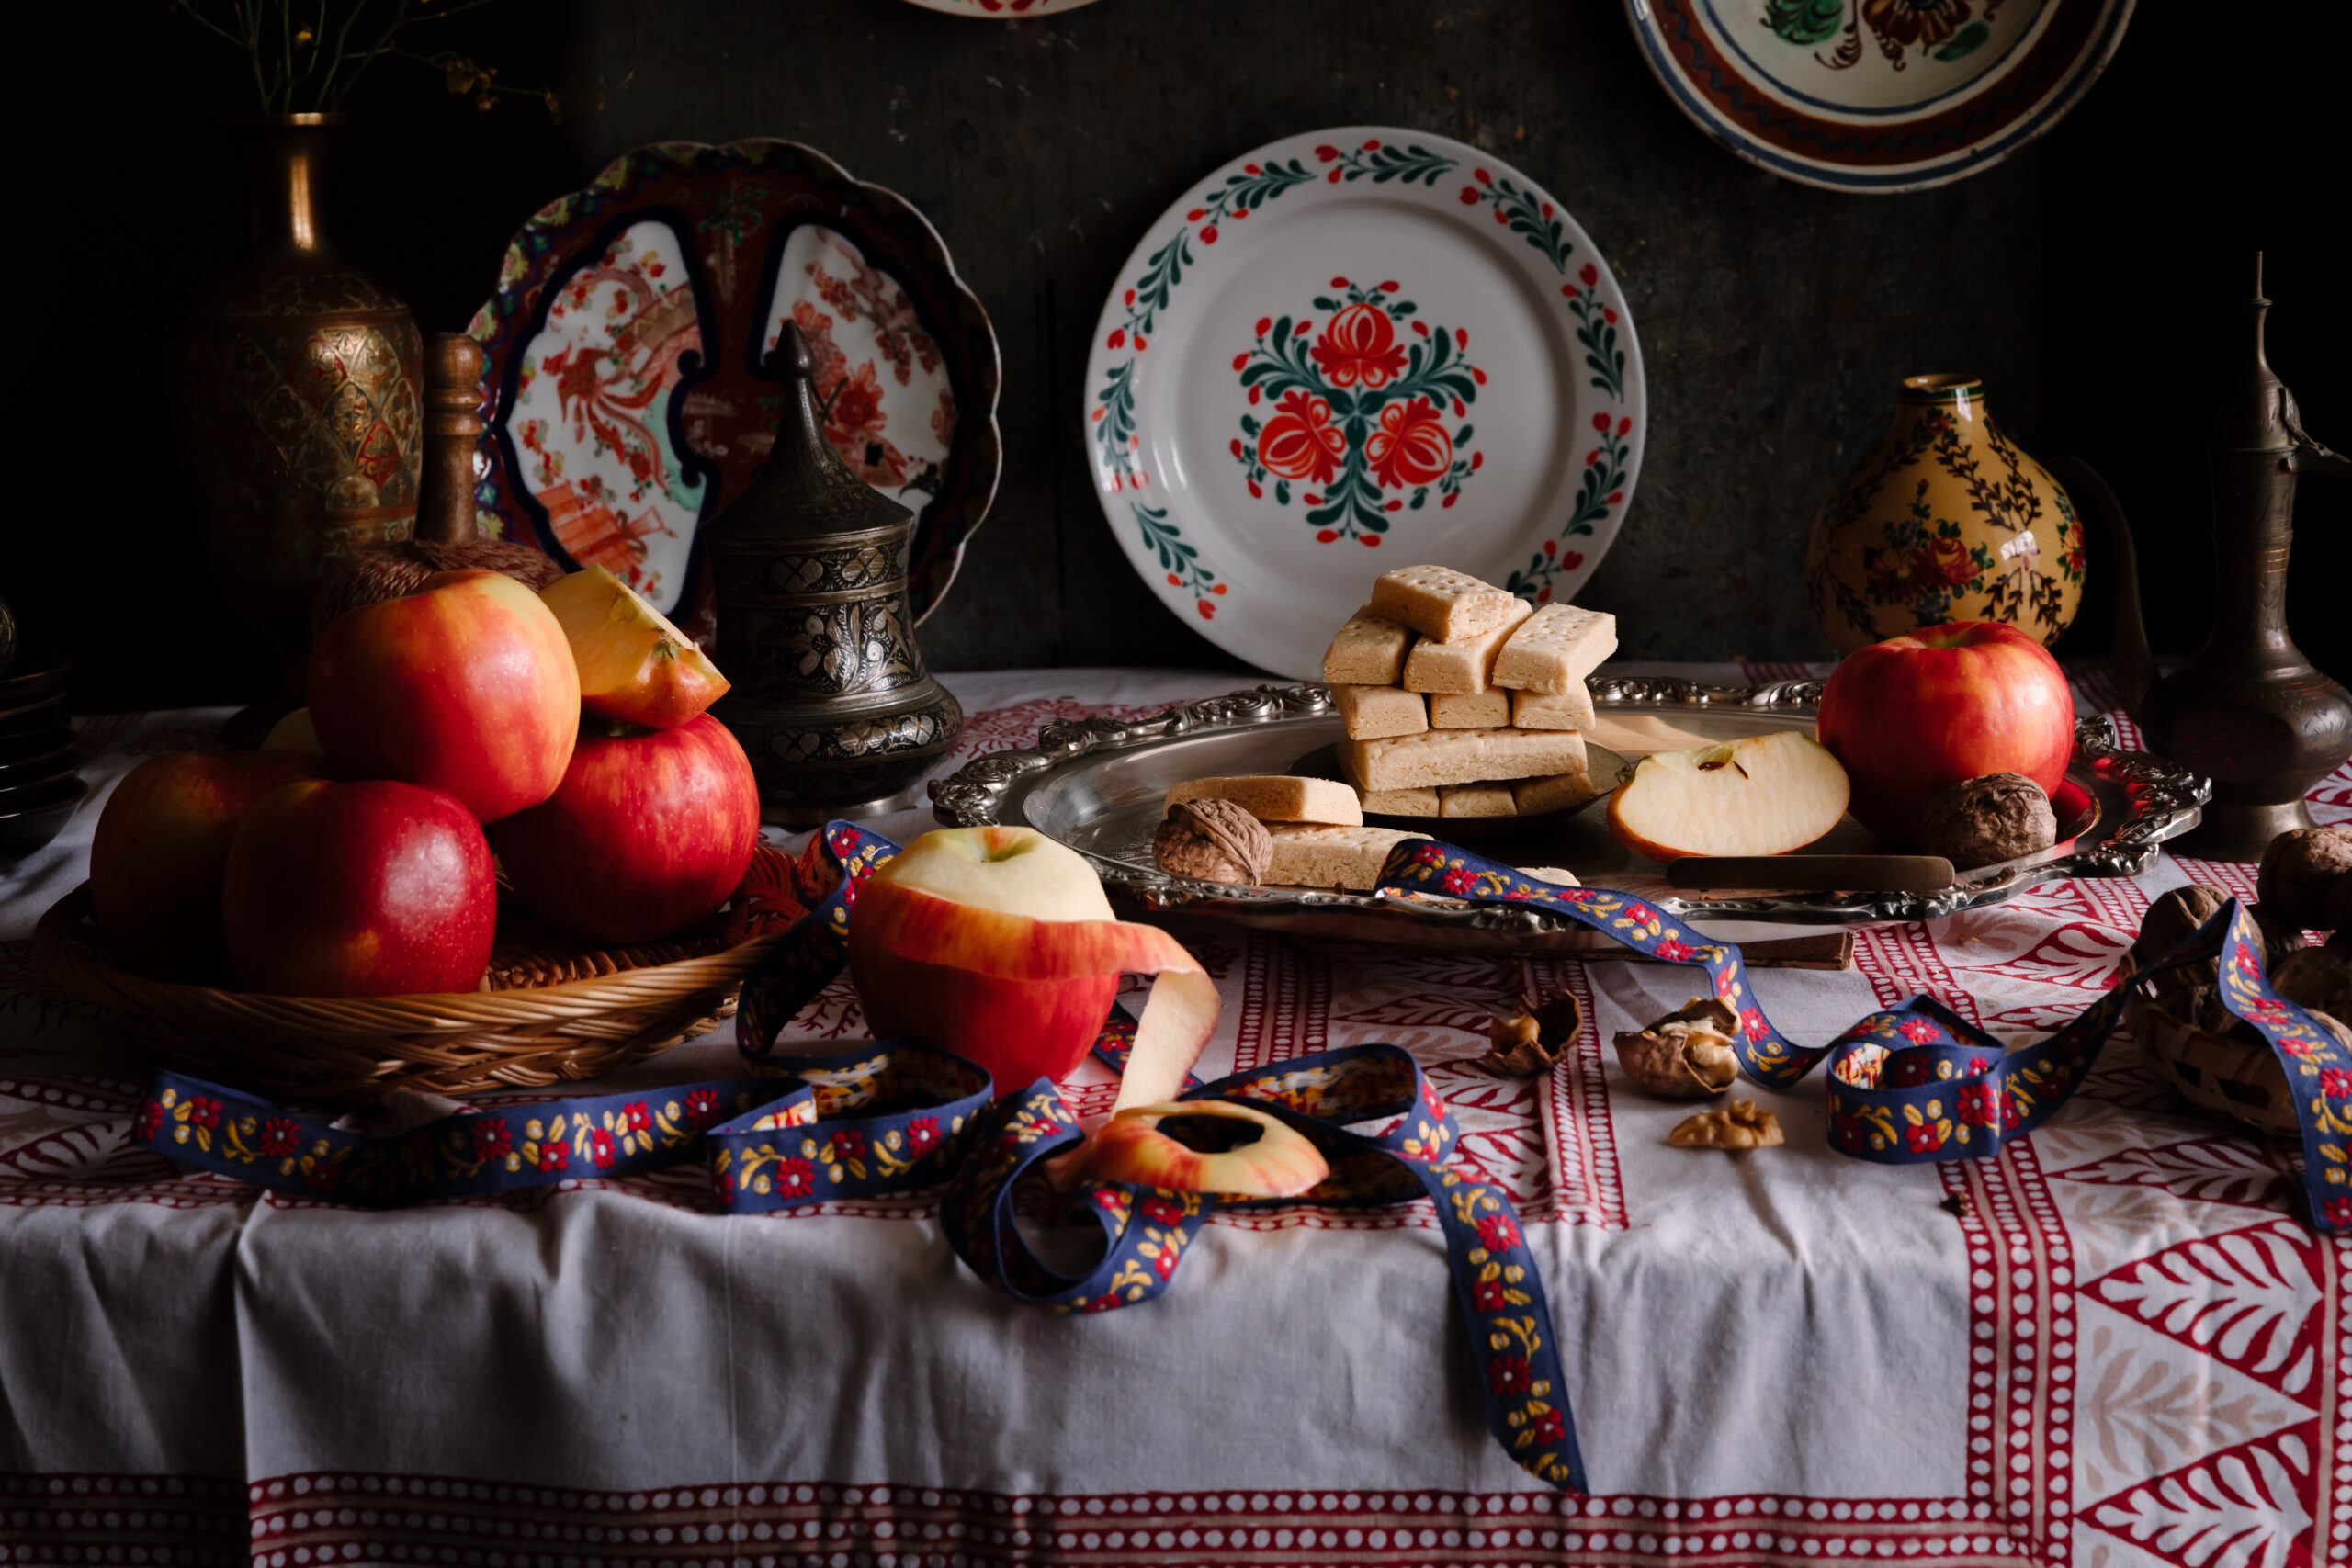 An image of apples, biscotti and plates on the table